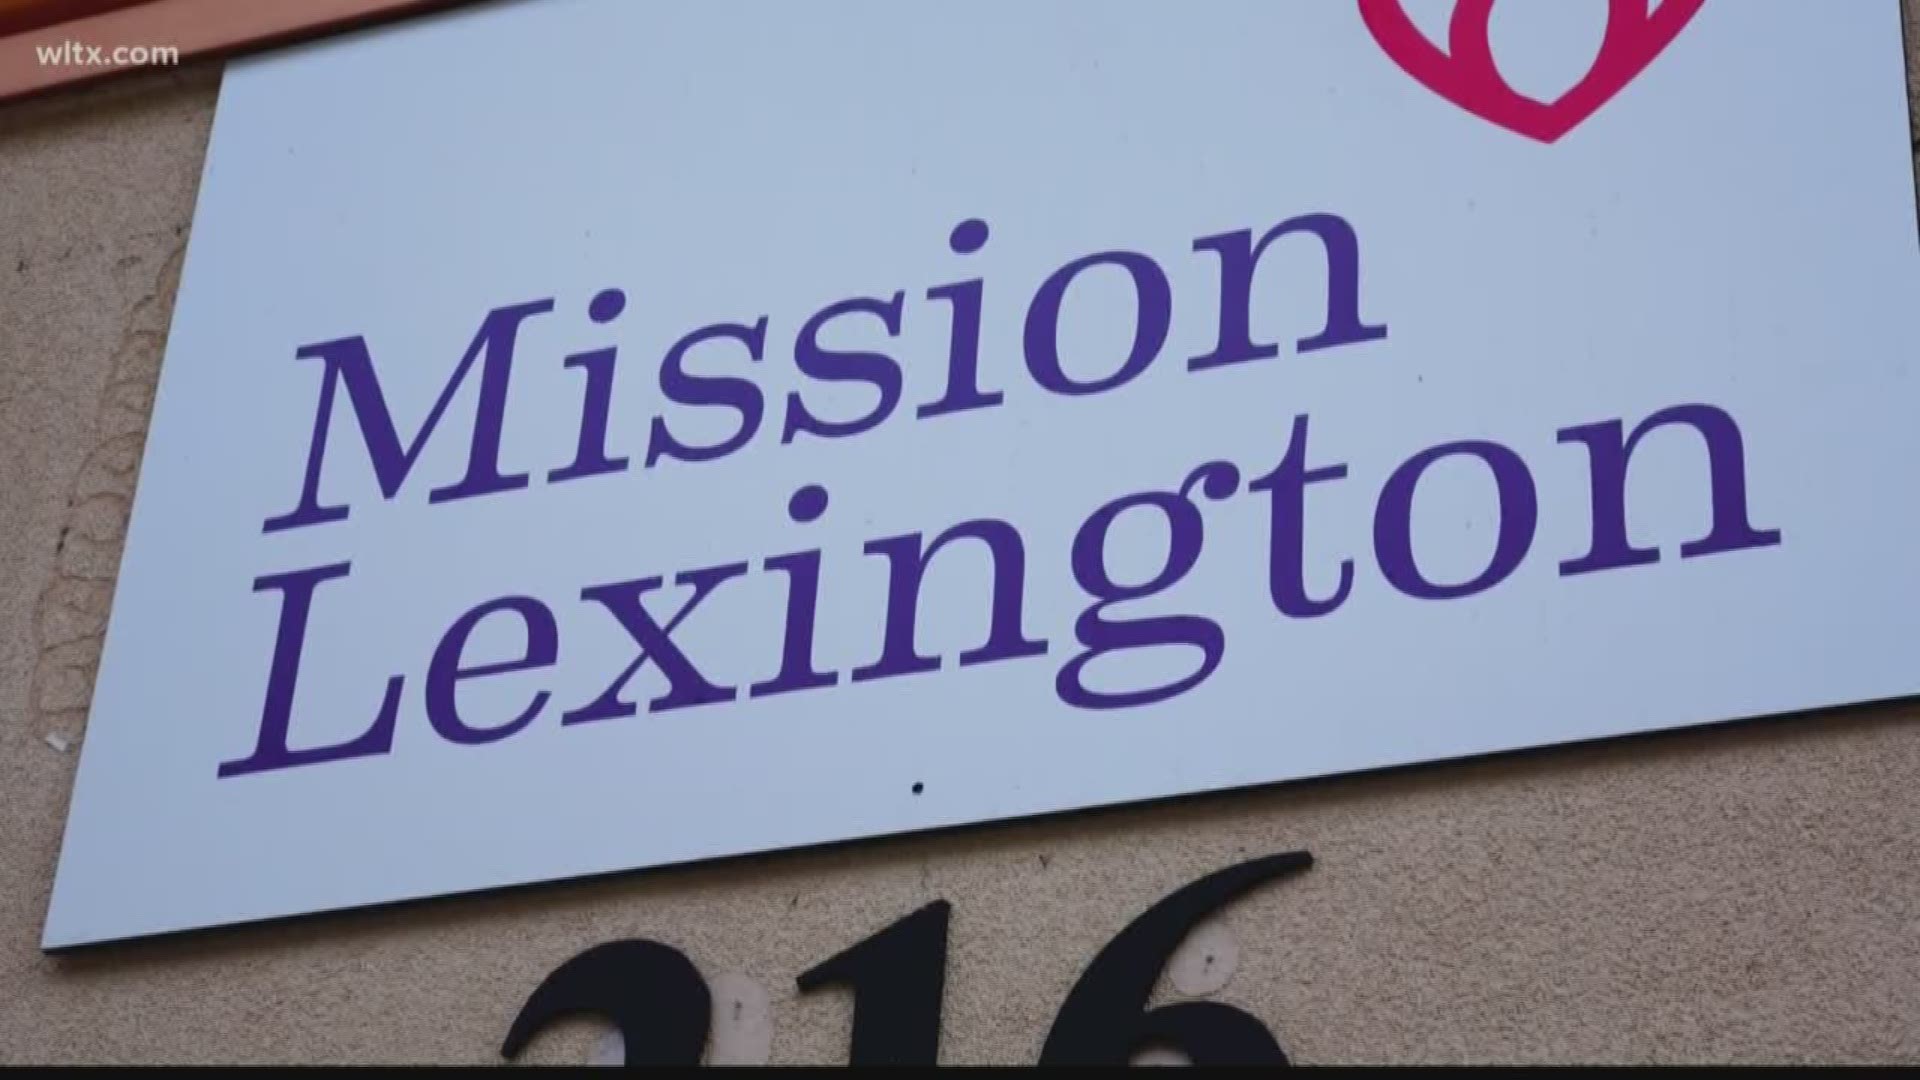 Mission Lexington is asking for mattresses, bed frames, or monetary donations to help families, one who has a desperate need for a bunk bed.